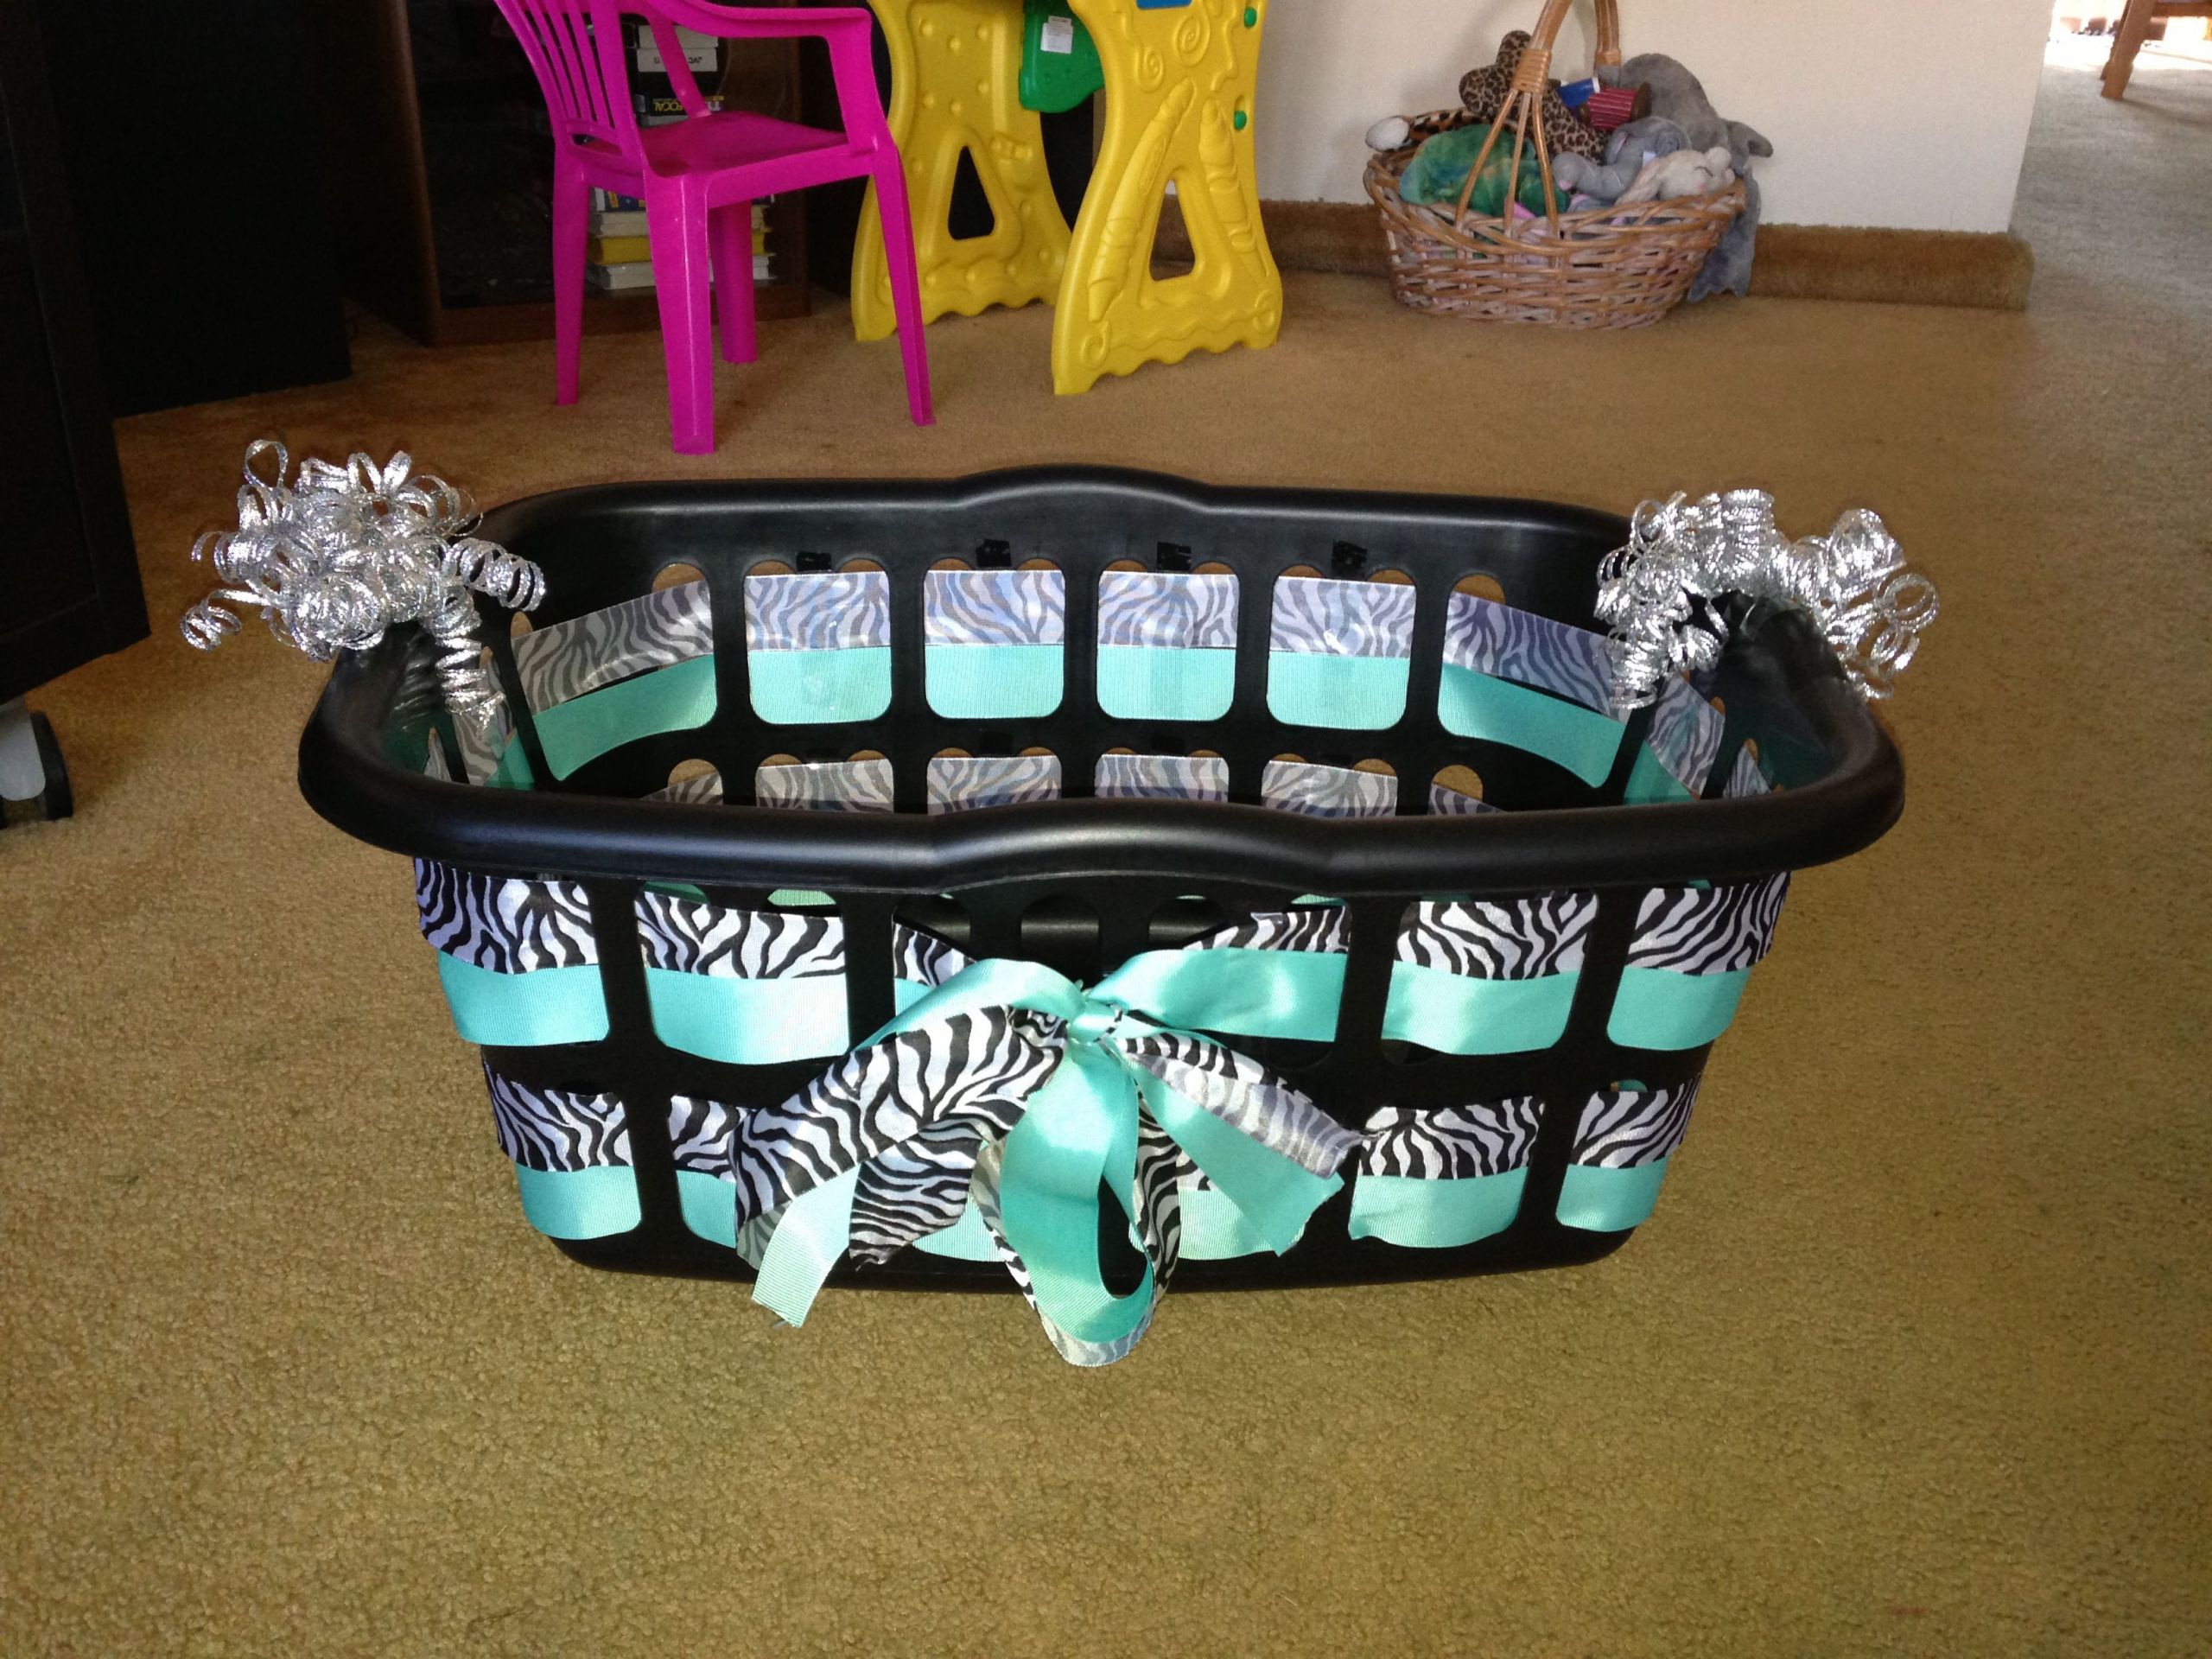 Cute Baby Shower Gift Basket Ideas
 Cute way to decorate the basket Fill it with stuff for a